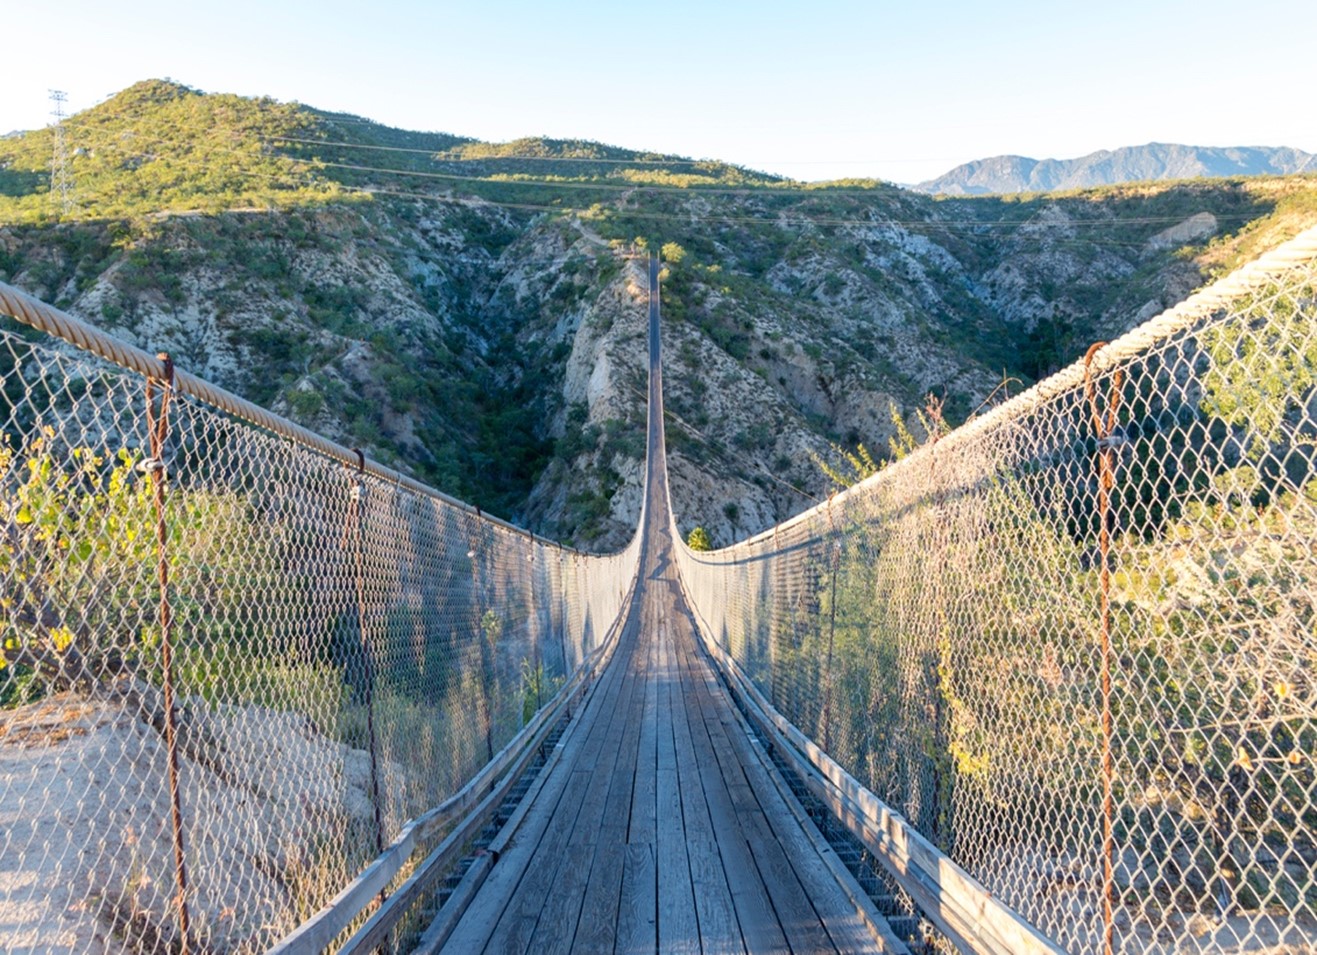 Image of a suspension bridge stretching over a wide canyon and into the distant green hills.